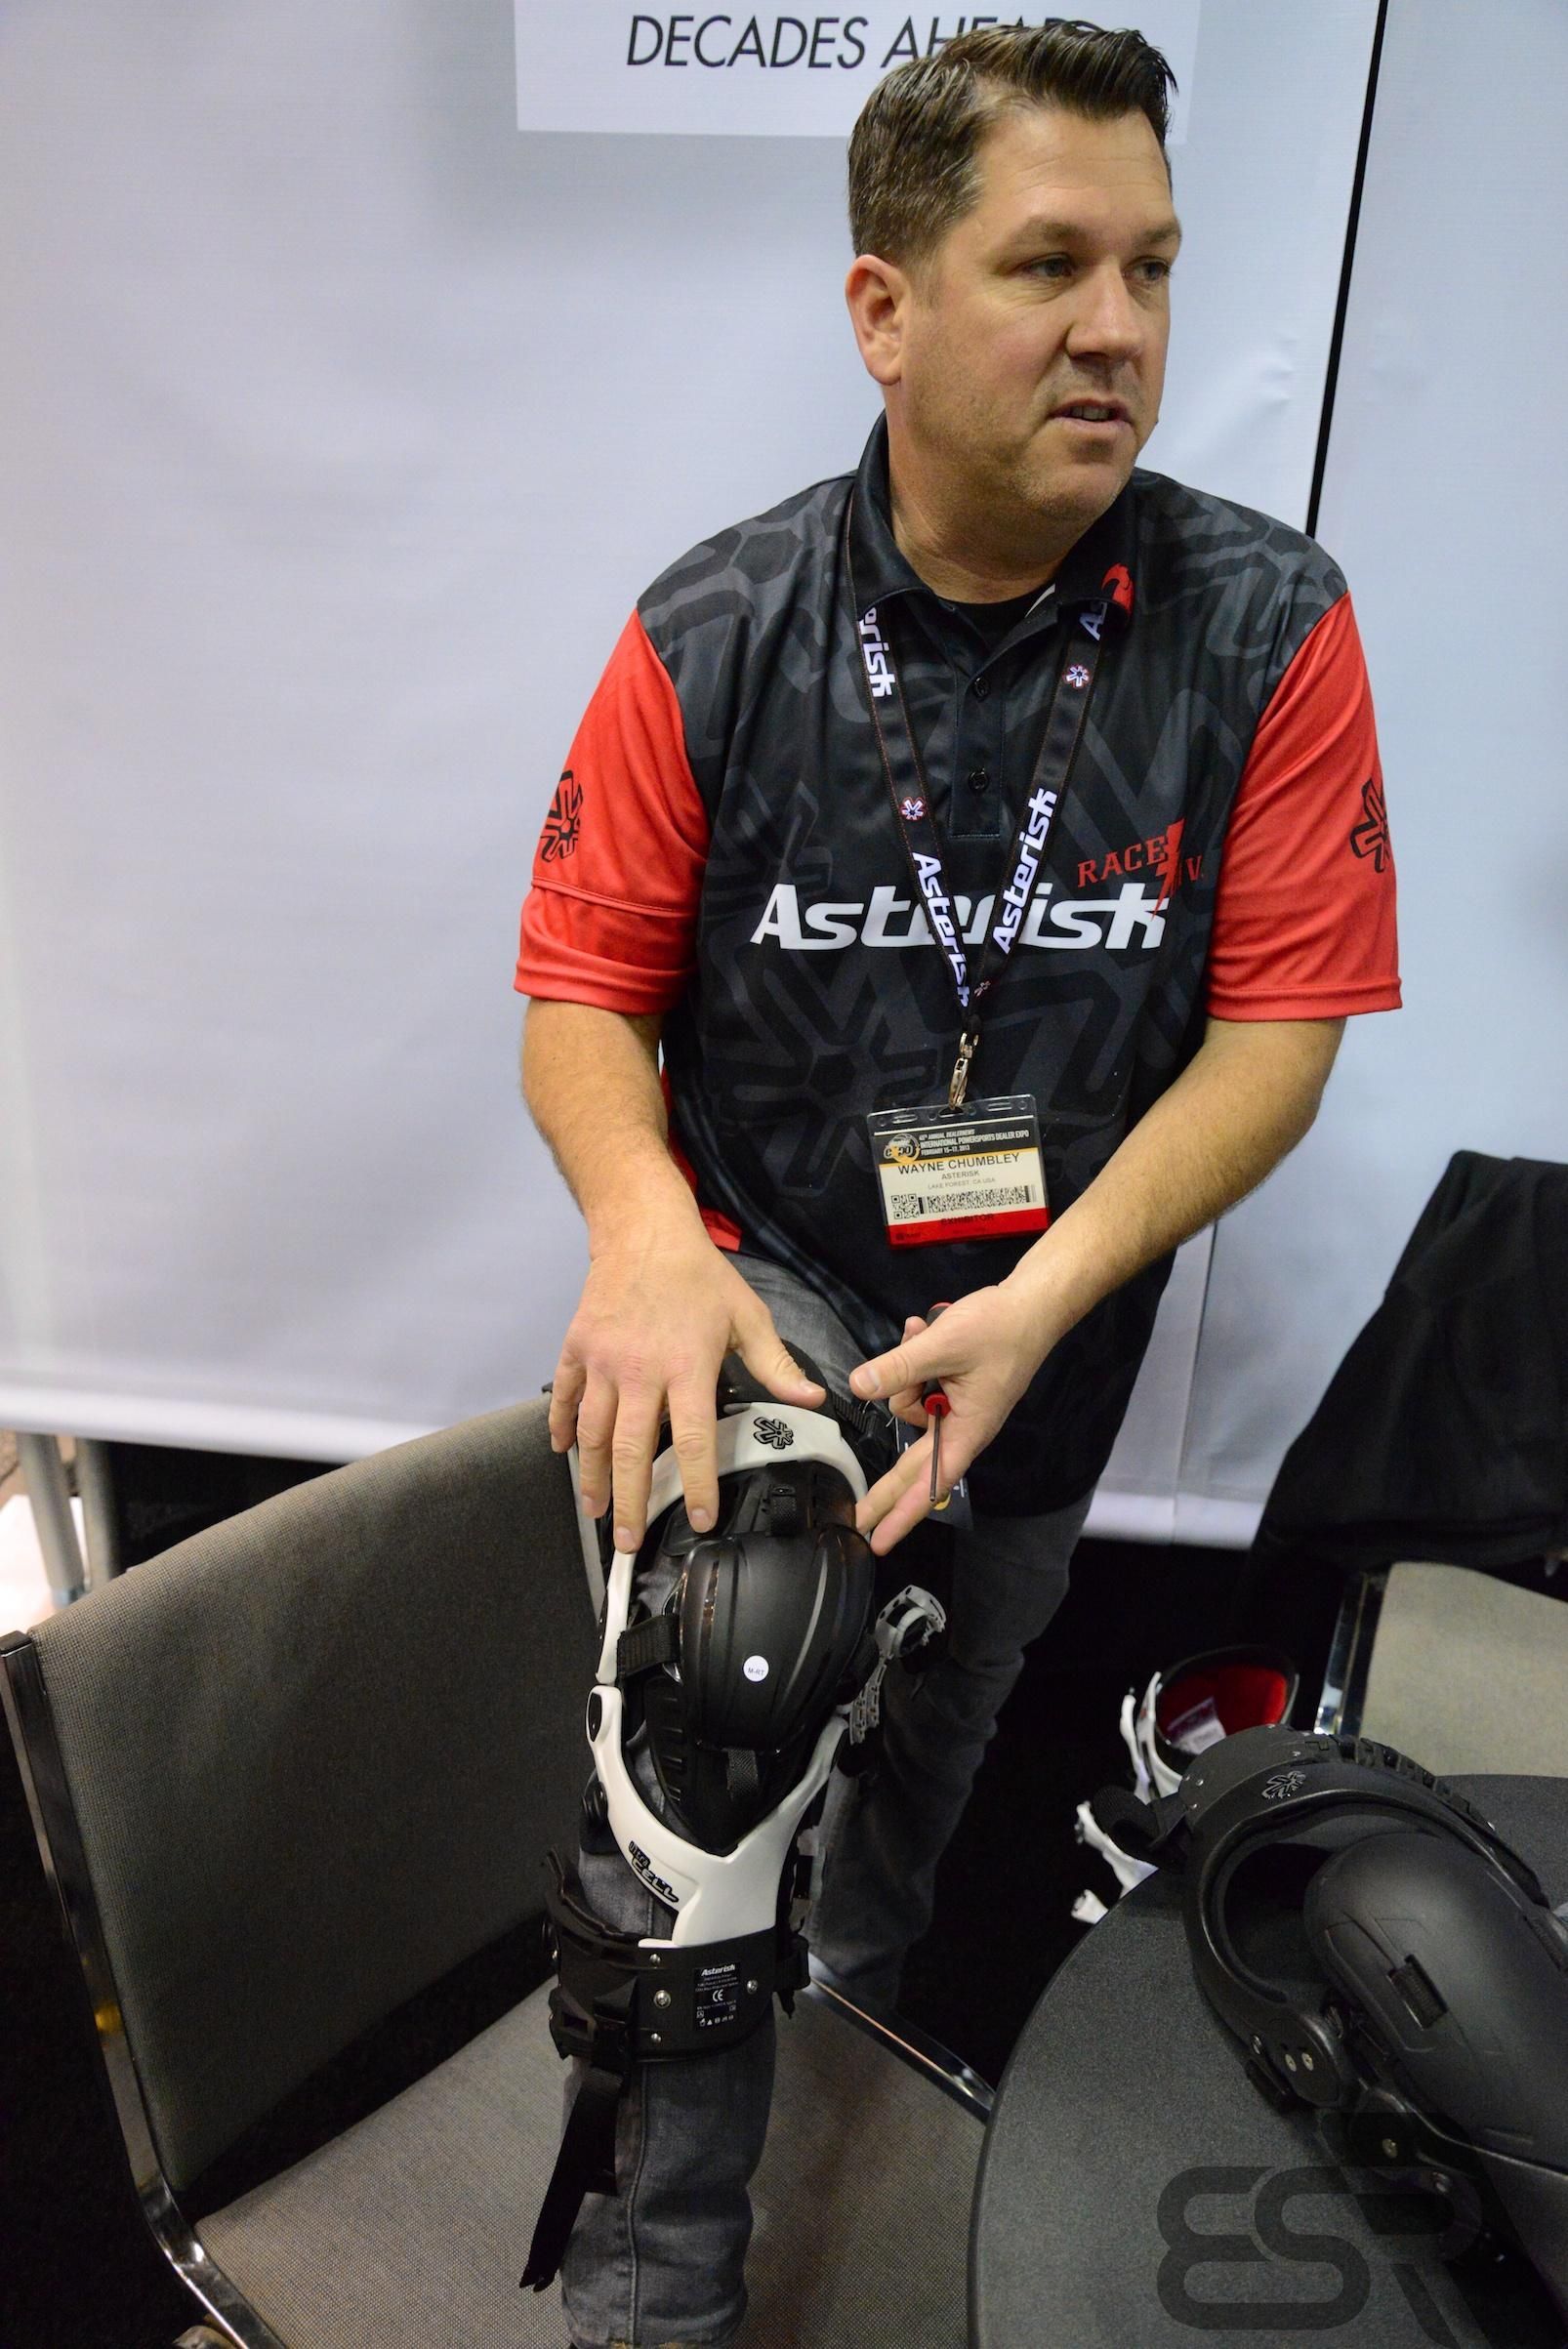 Wayne from Asterisk gave me a great explanation for why I need knee protection in dirt